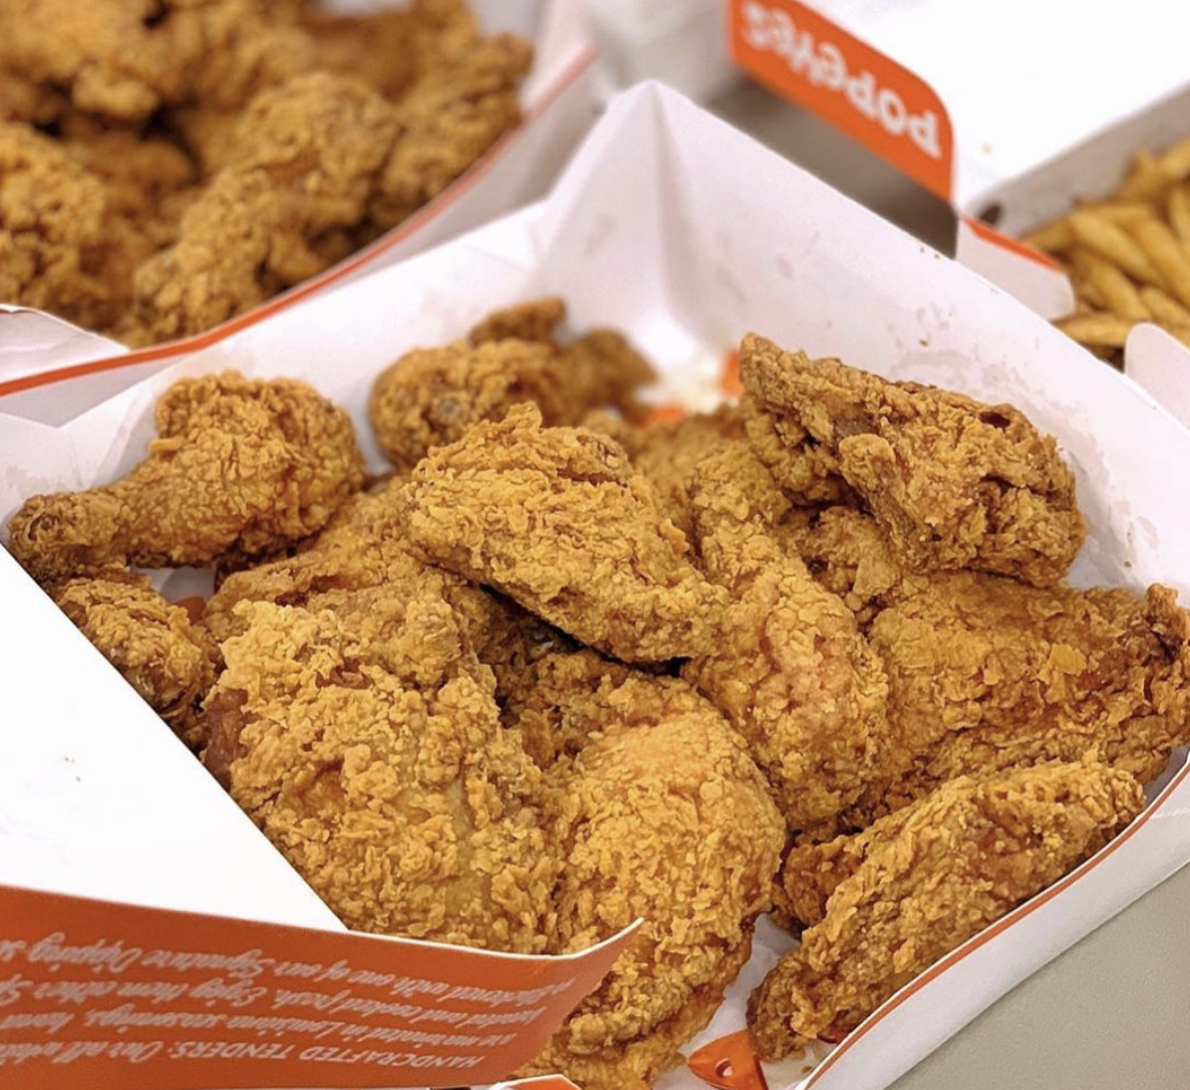 Popeyes Has A New $12 Family Deal